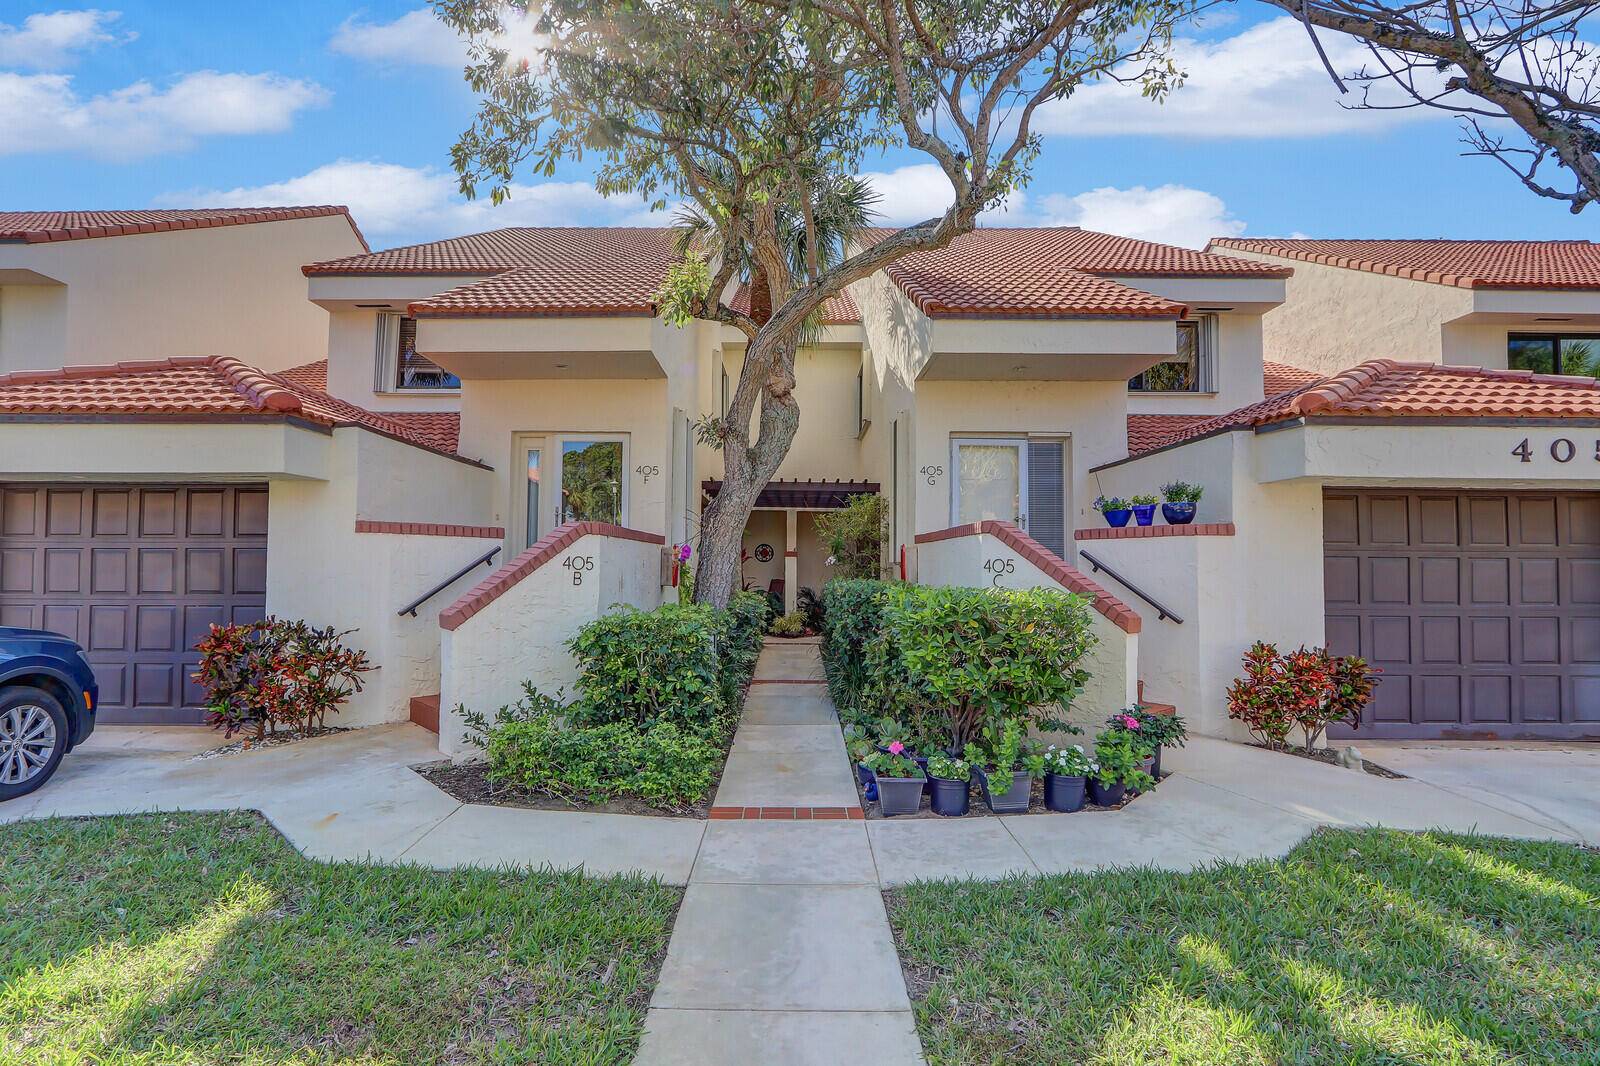 Escape to Paradise with this stunning 2 2 1 in the heart of Juno Beach.